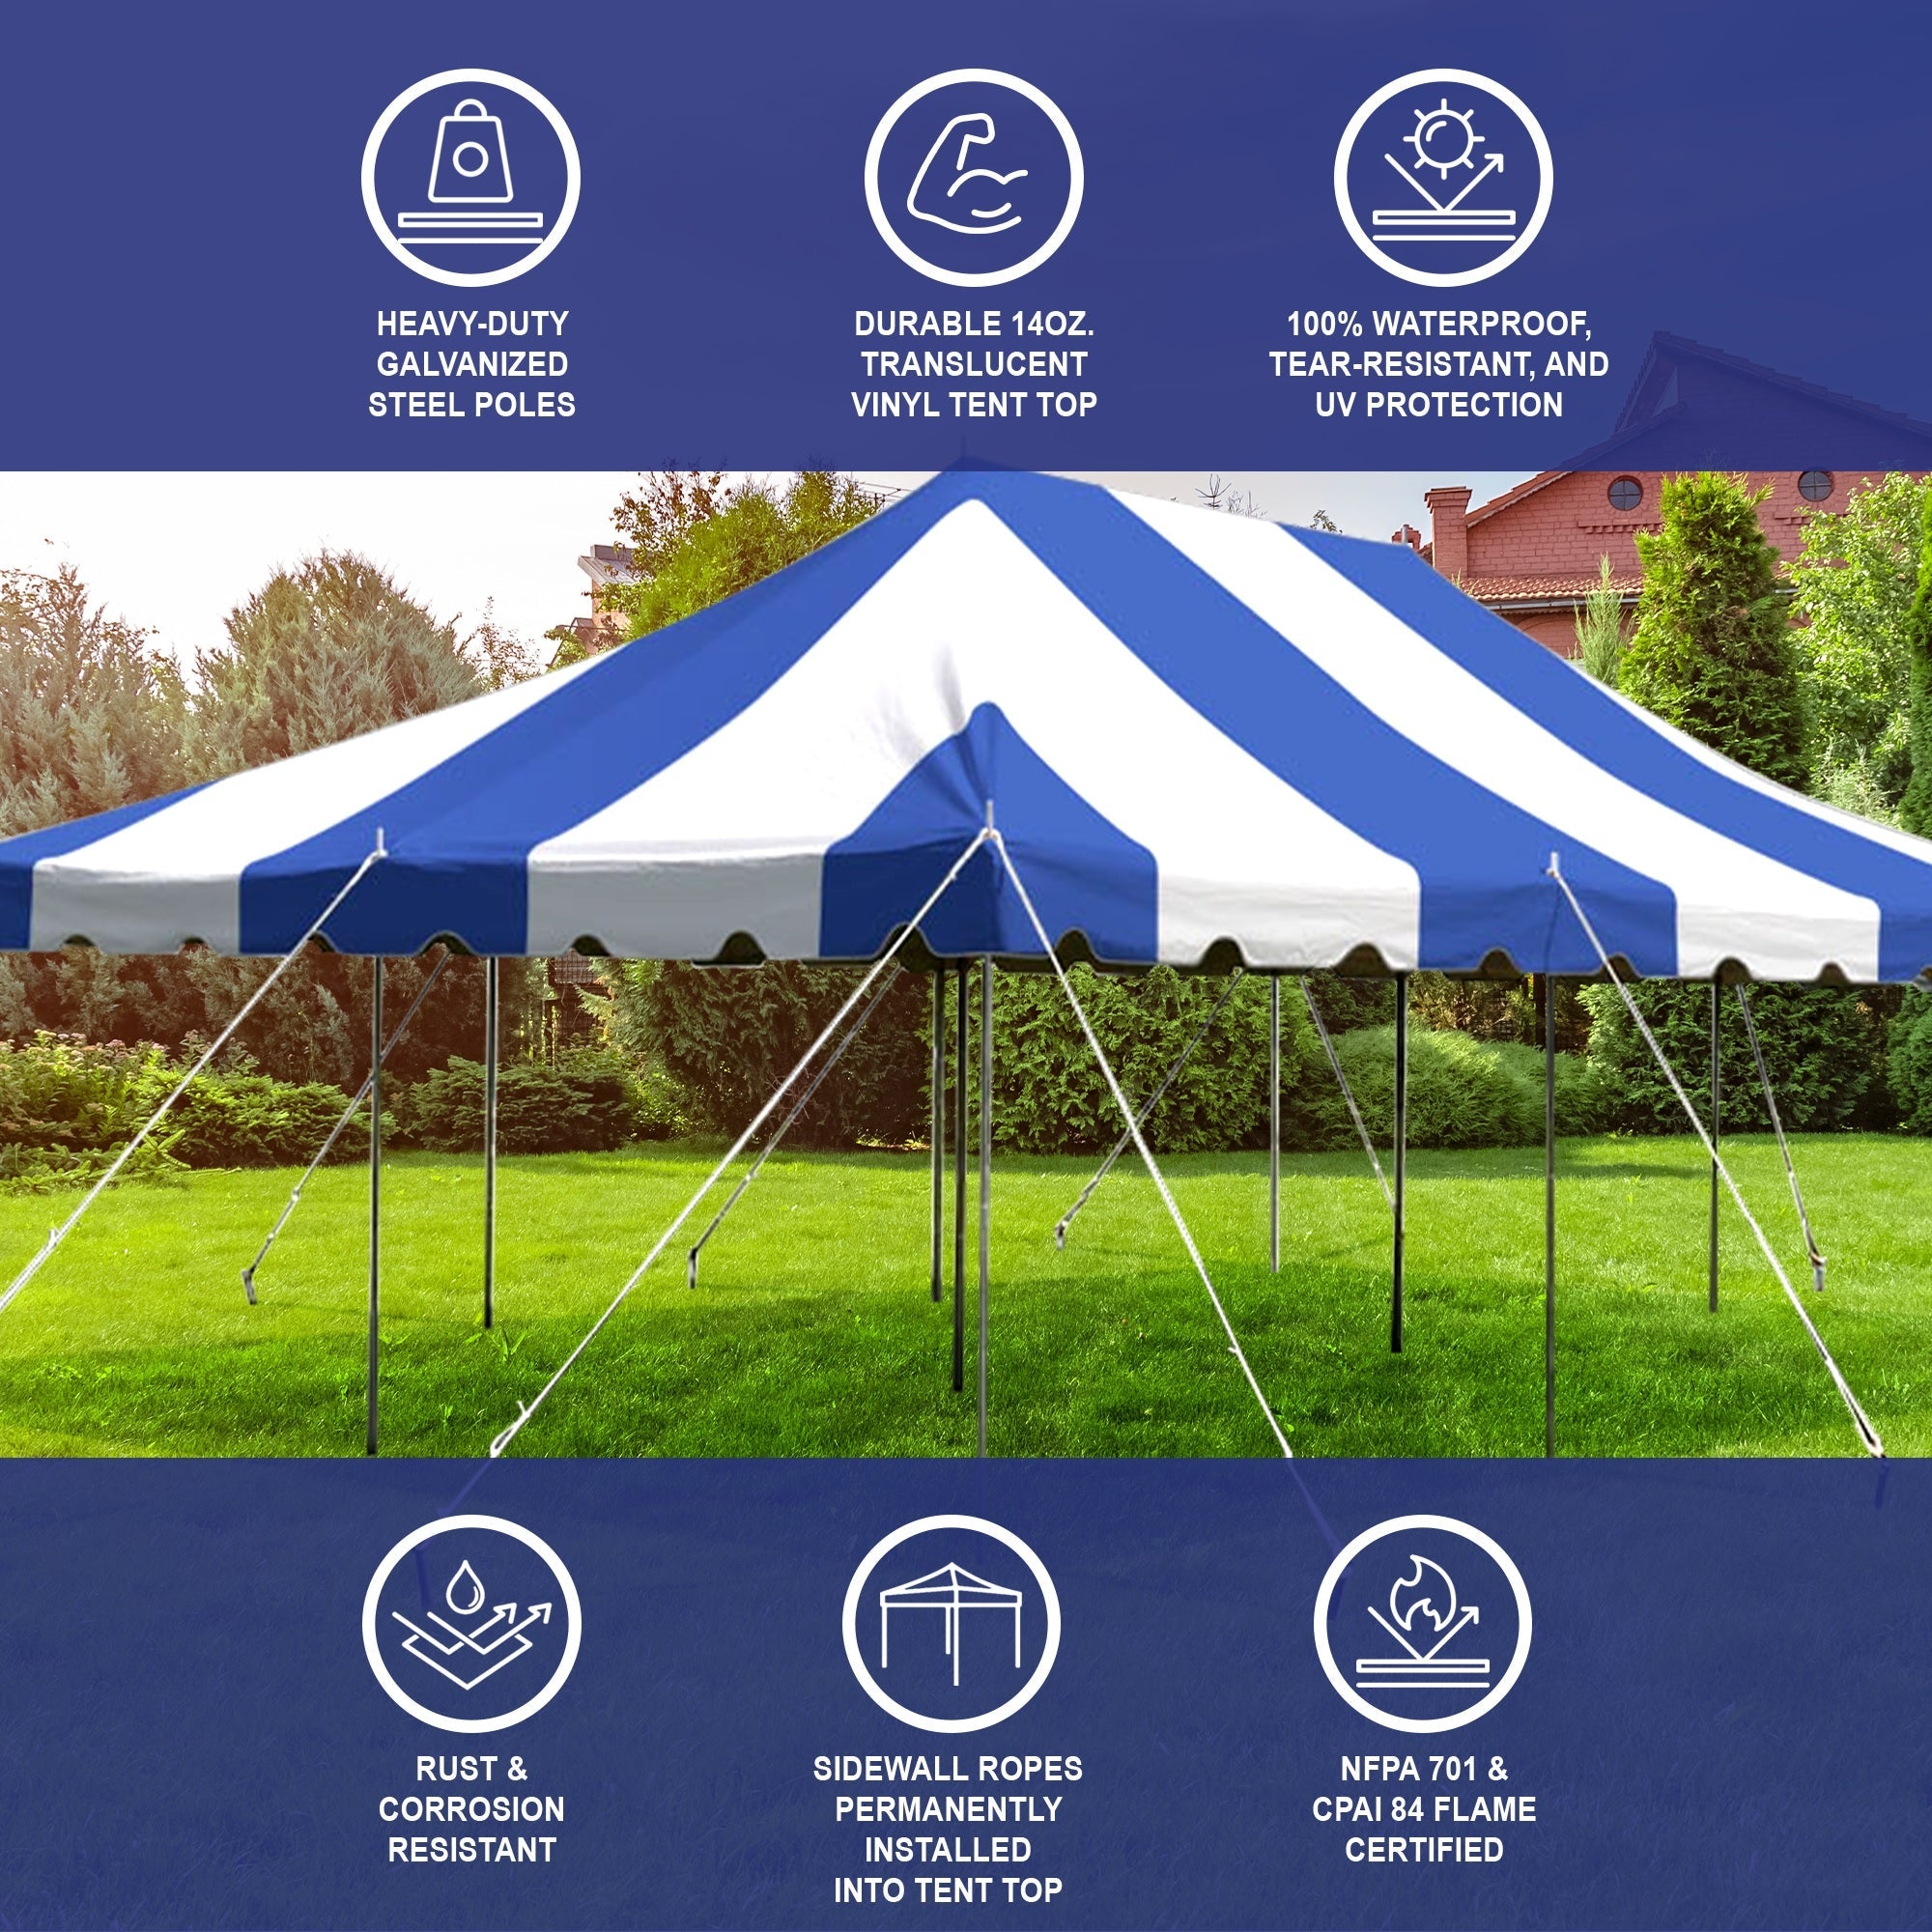 Party Tents Direct Weekender Outdoor Canopy Pole Tent, Blue, 20 ft x 30 ft